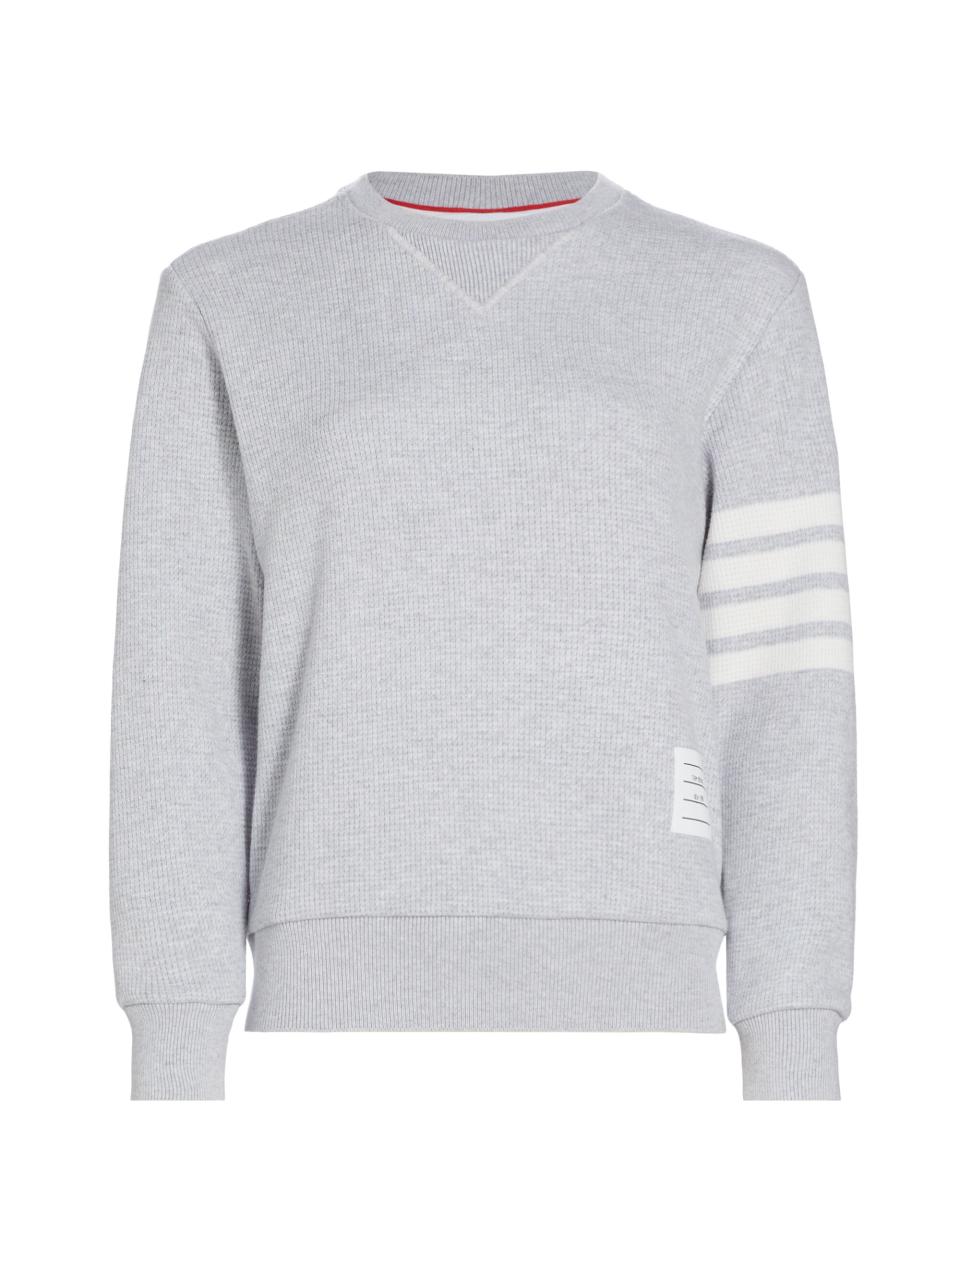 Saks and Thom Browne Wool Four-Bar Sweater